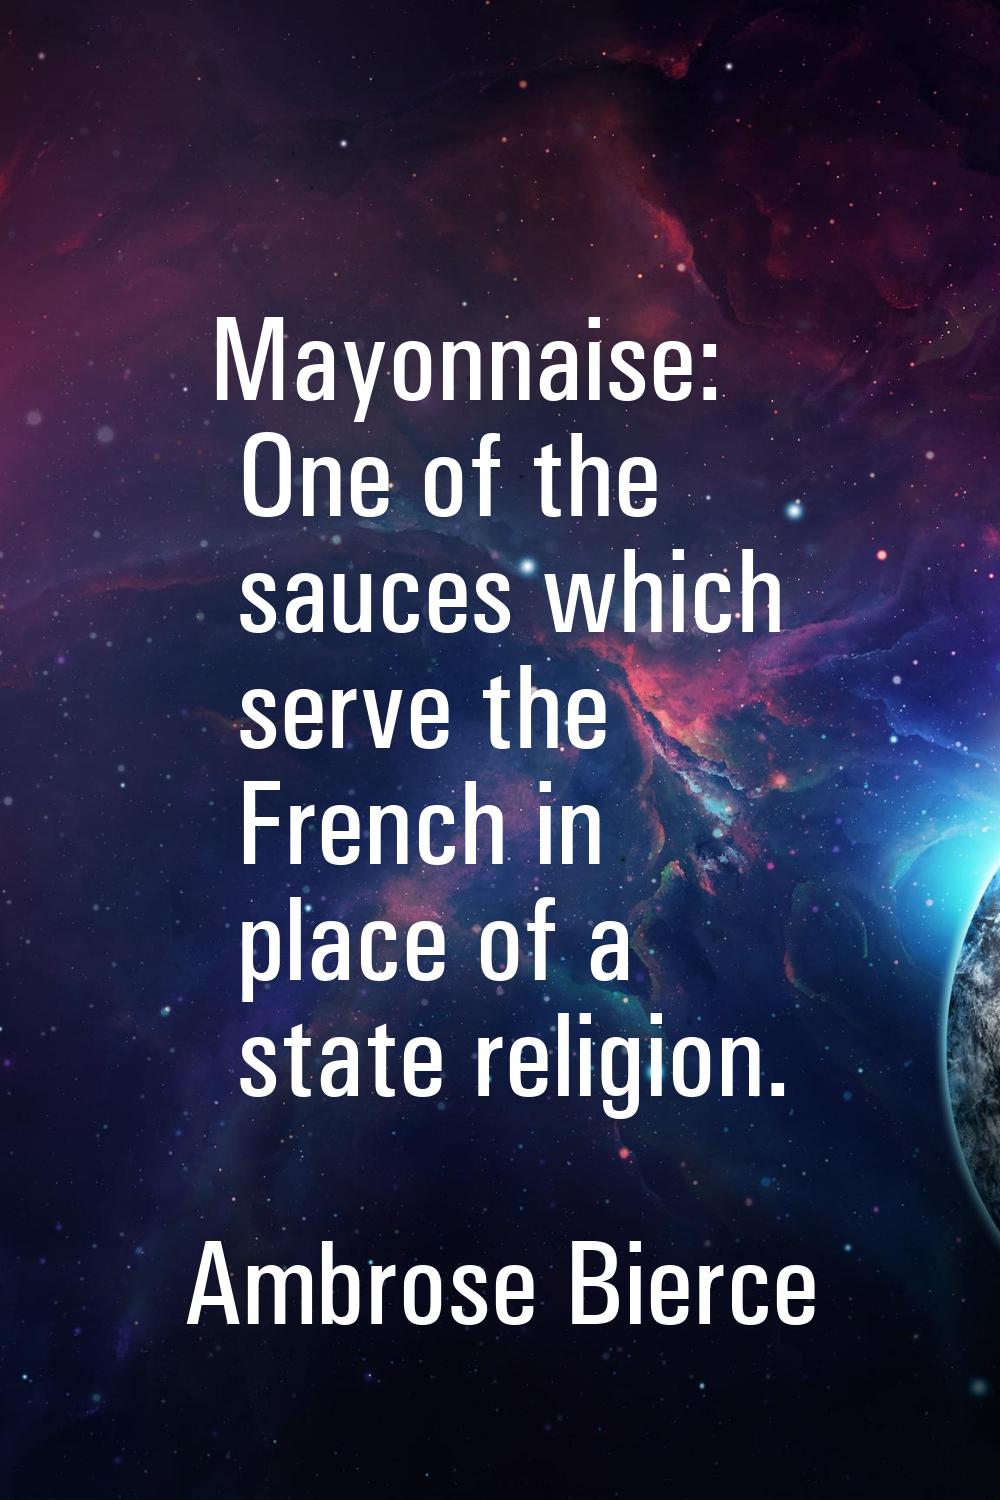 Mayonnaise: One of the sauces which serve the French in place of a state religion.